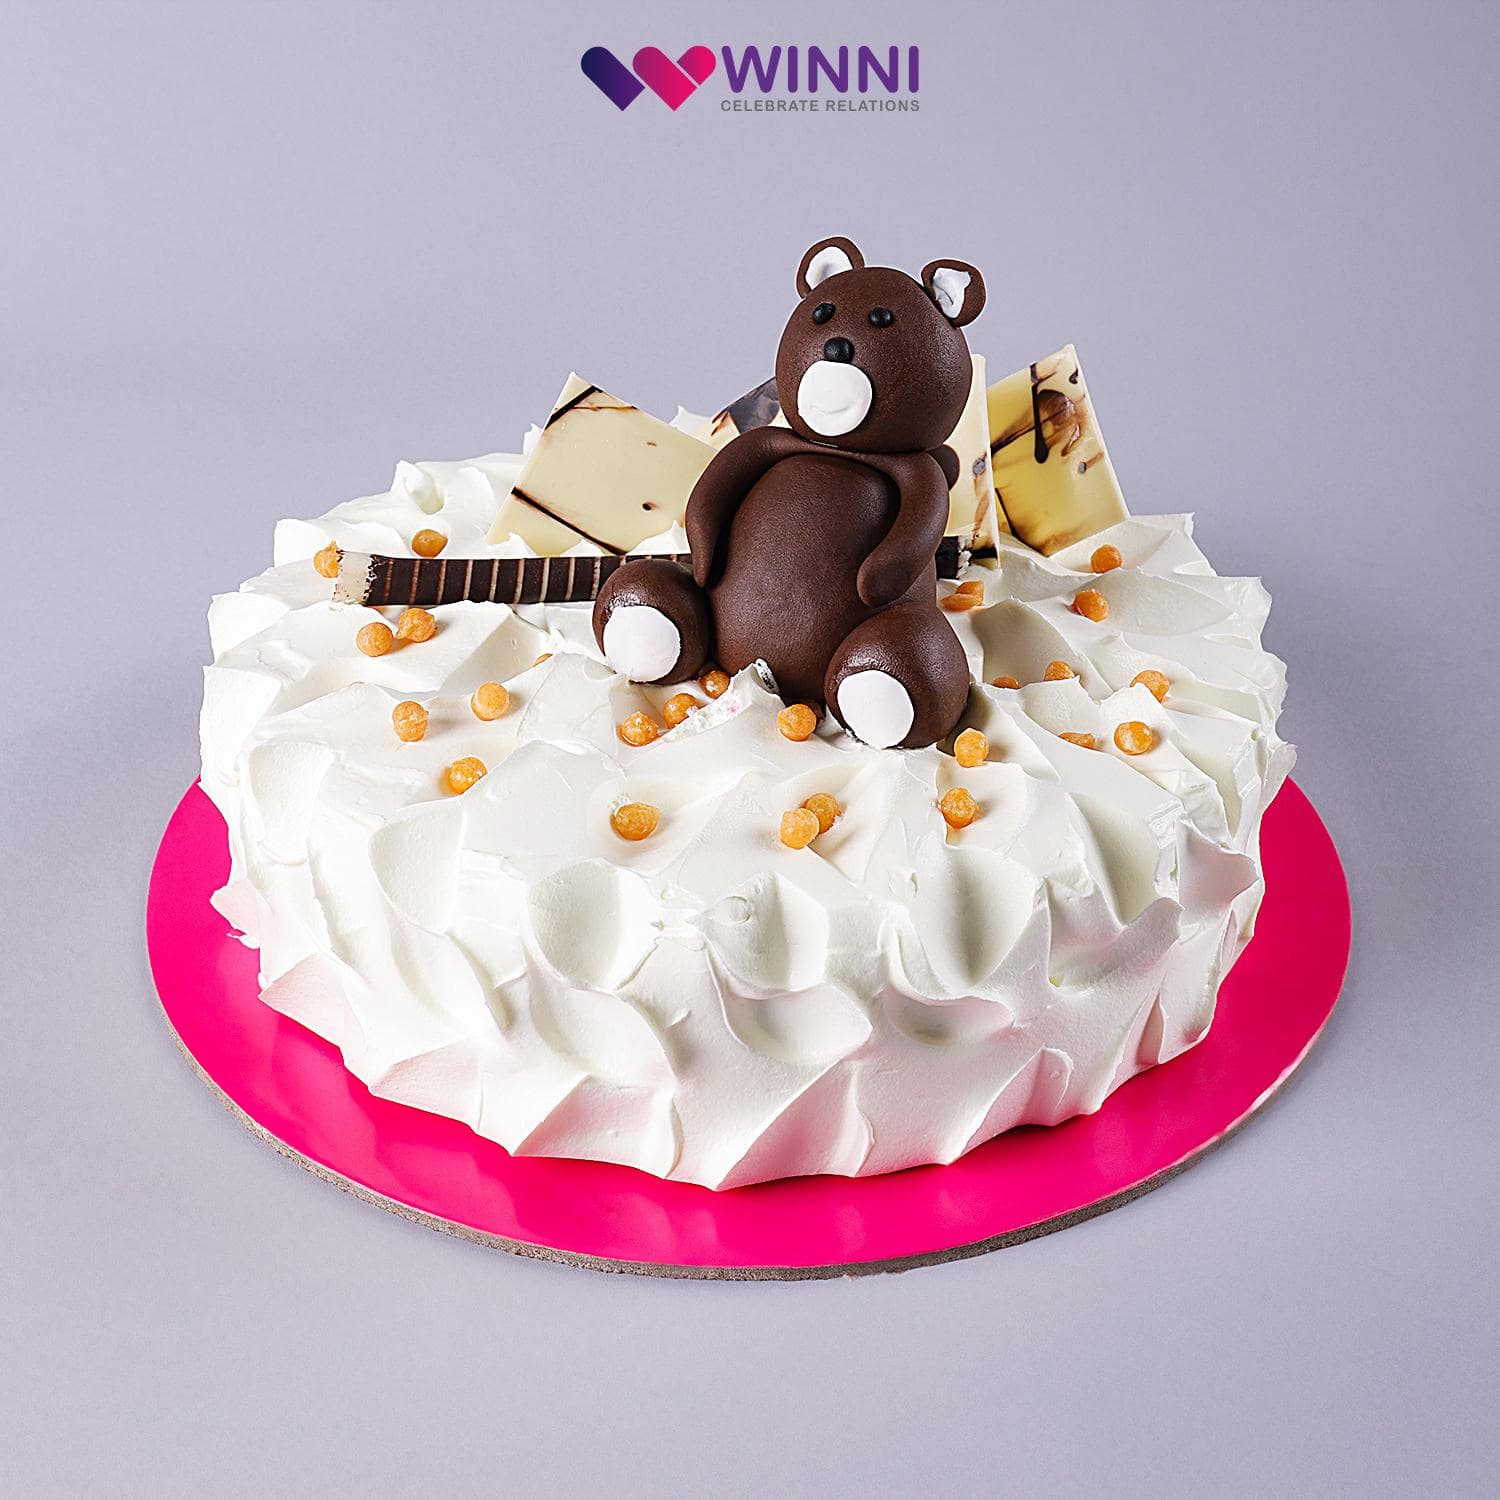 3G's Cafe - WINNI Cakes & More